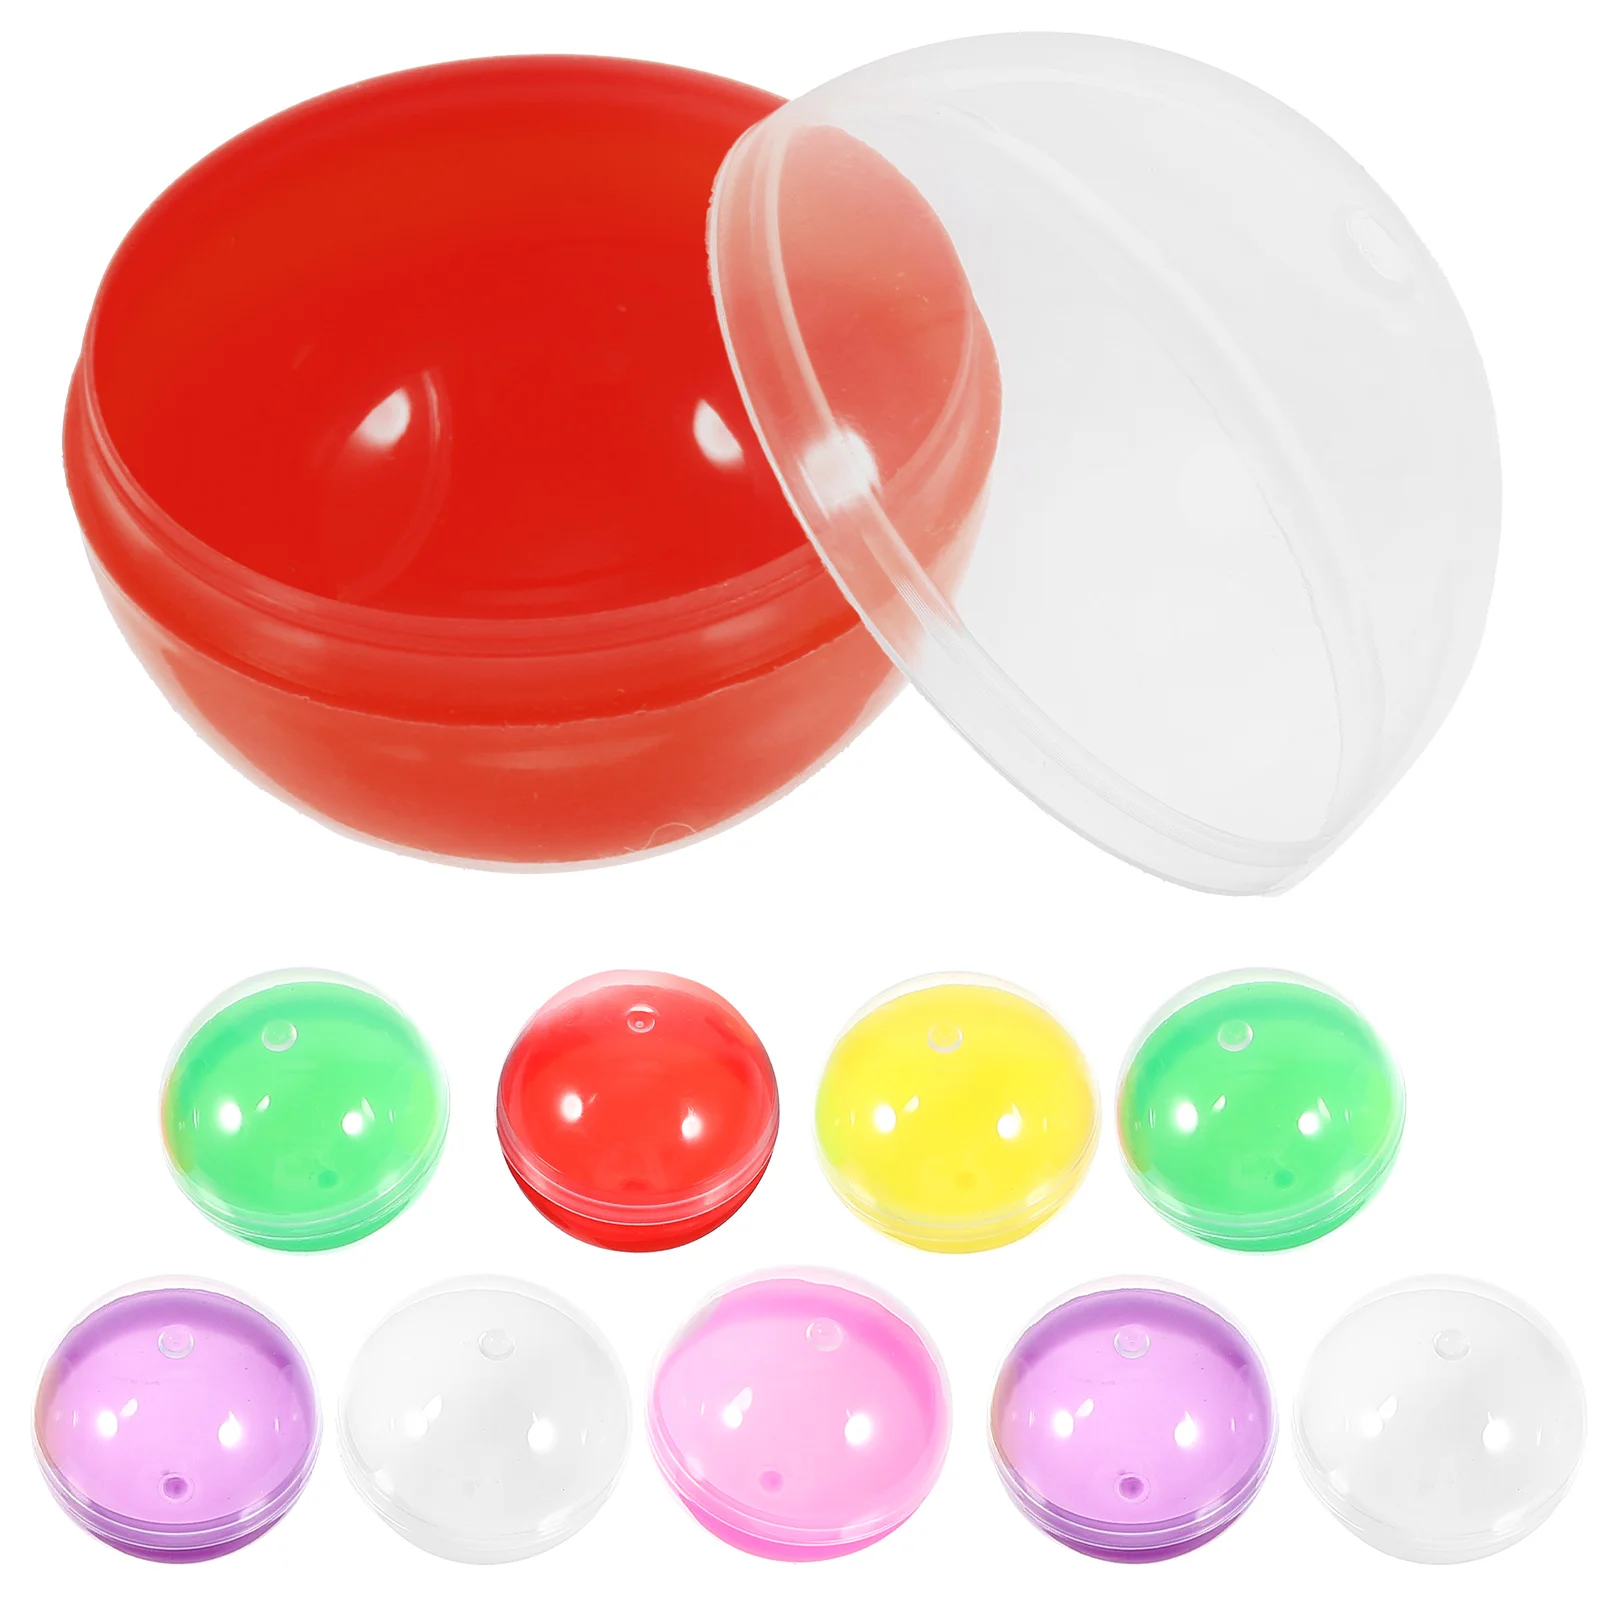 

32mm Plastic Fillable Balls Openable Storage Packing Balls Funny Colored DIY Balls Colorful Balls Multi-use Twisted Balls